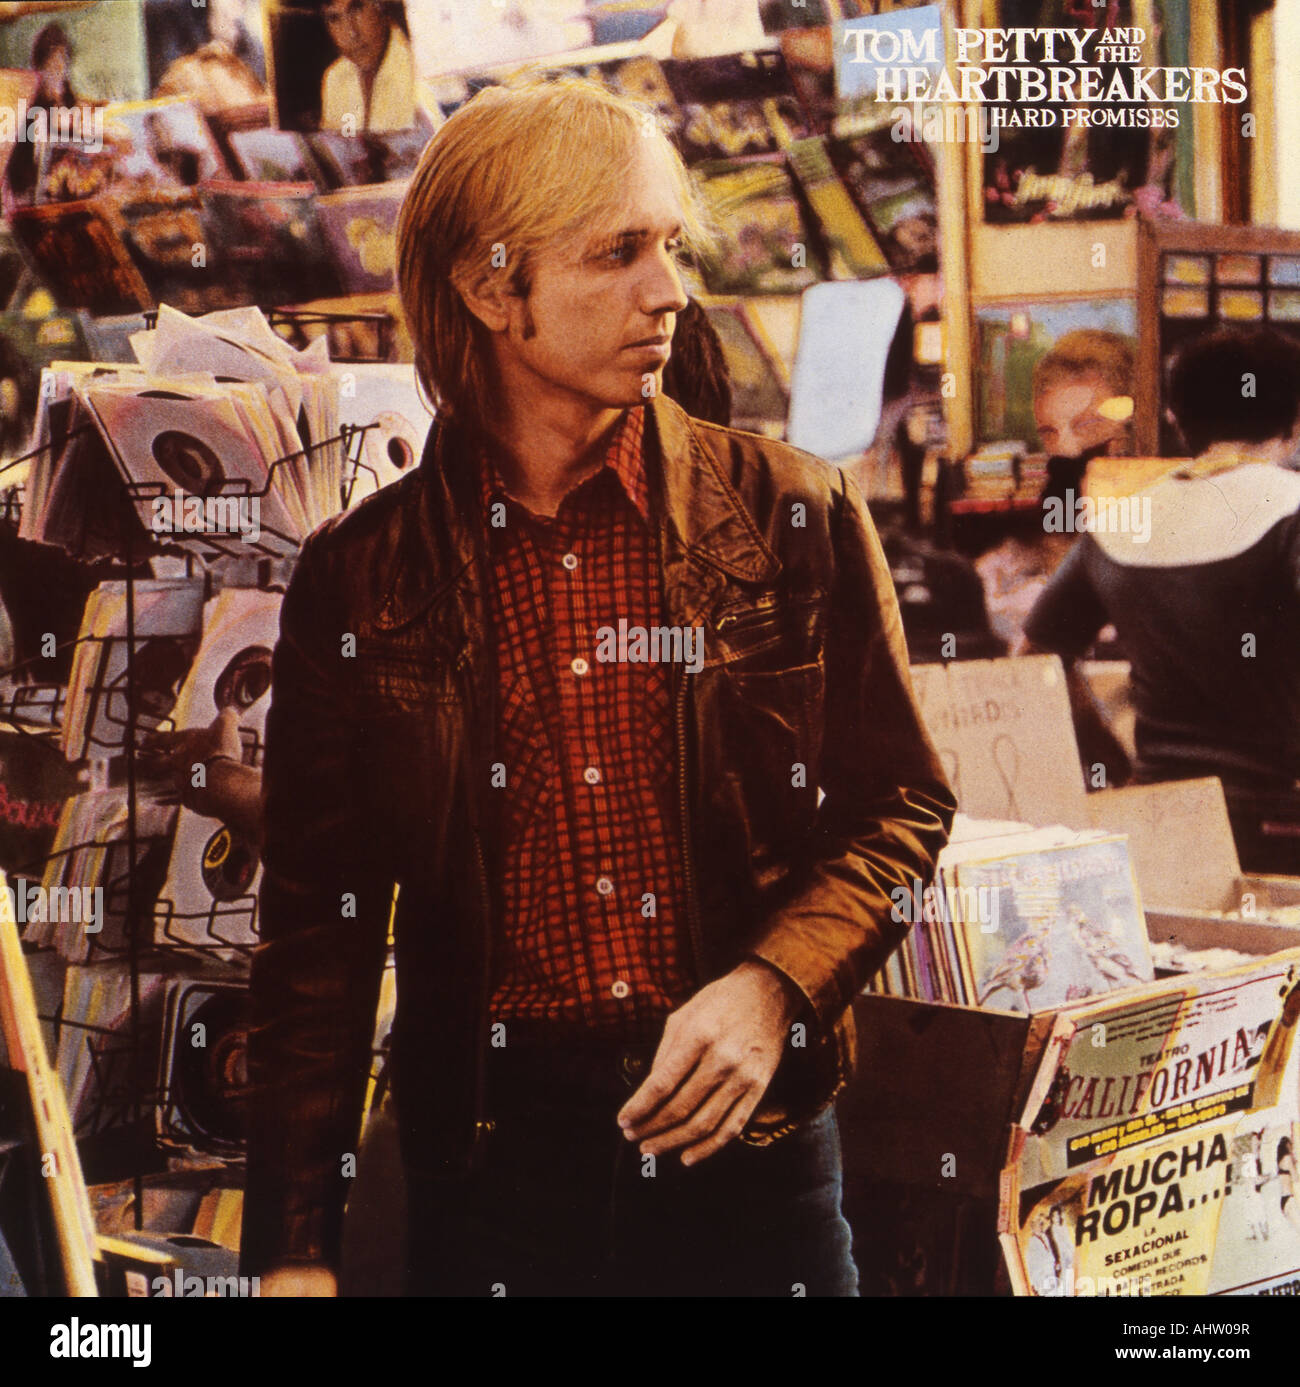 TOM PETTY AND THE HEARTBRAKERS album HARD PROMISES issued in 1981 by MCA Stock Photo